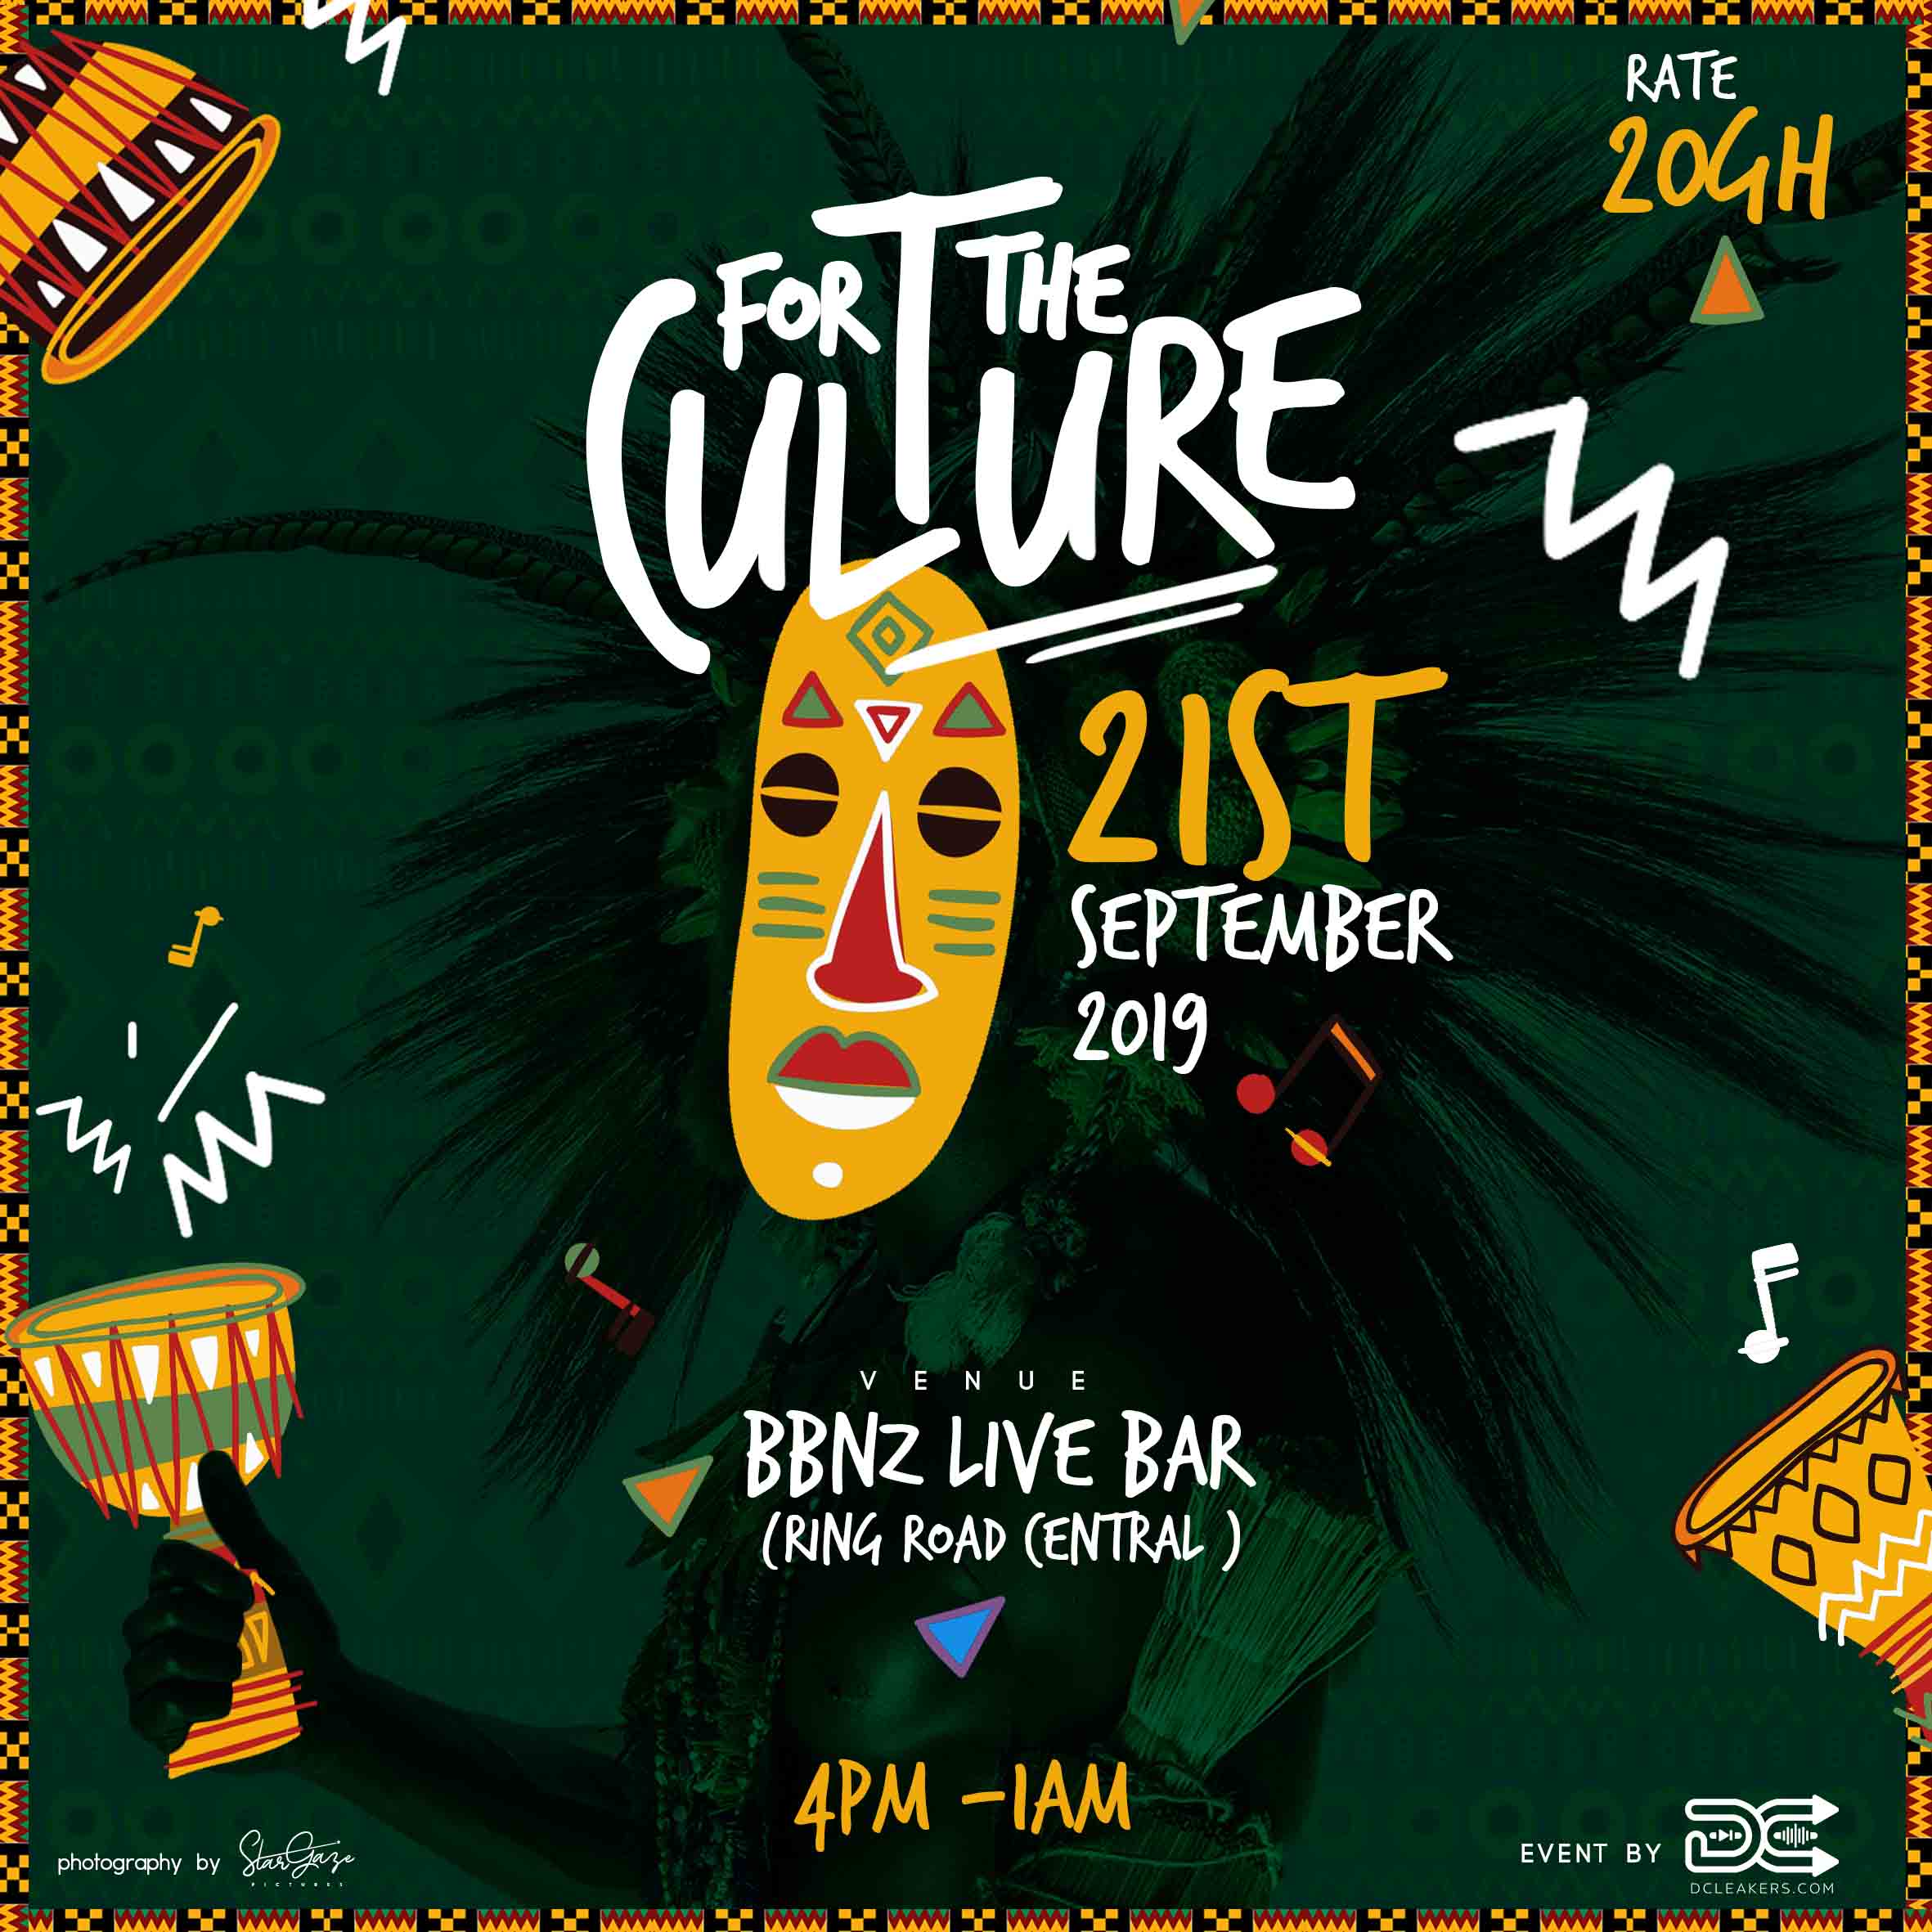 “Do It For The Culture” , A Ghana-Music Themed Event Hosted By DCLeakers